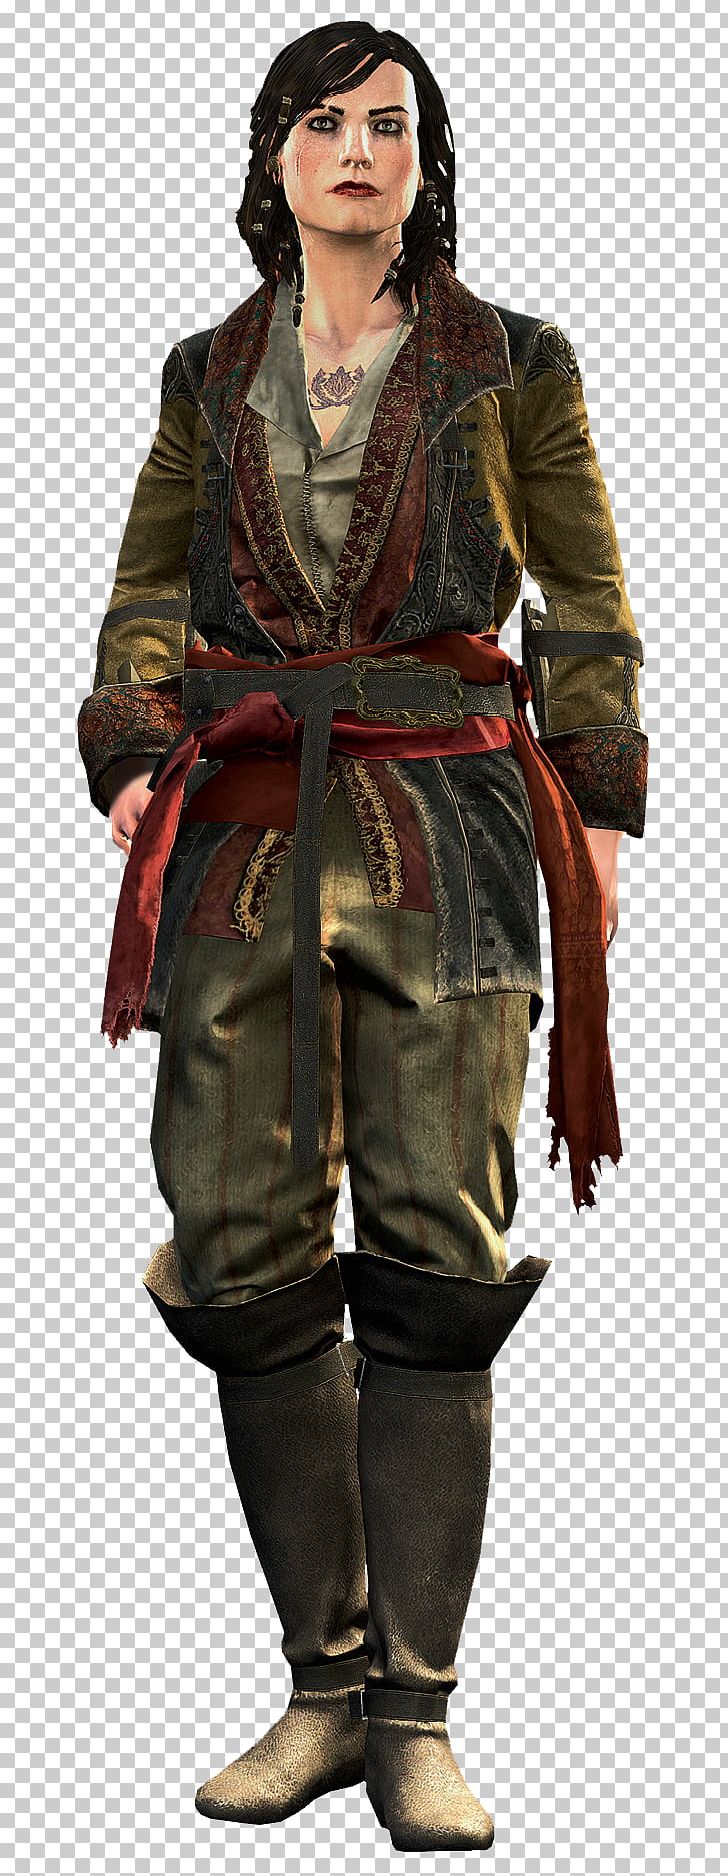 Mary Read Assassin's Creed IV: Black Flag Golden Age Of Piracy Republic Of Pirates PNG, Clipart, Anne Bonny, Assassins, Assassins Creed, Assassins Creed Iv Black Flag, Costume Free PNG Download